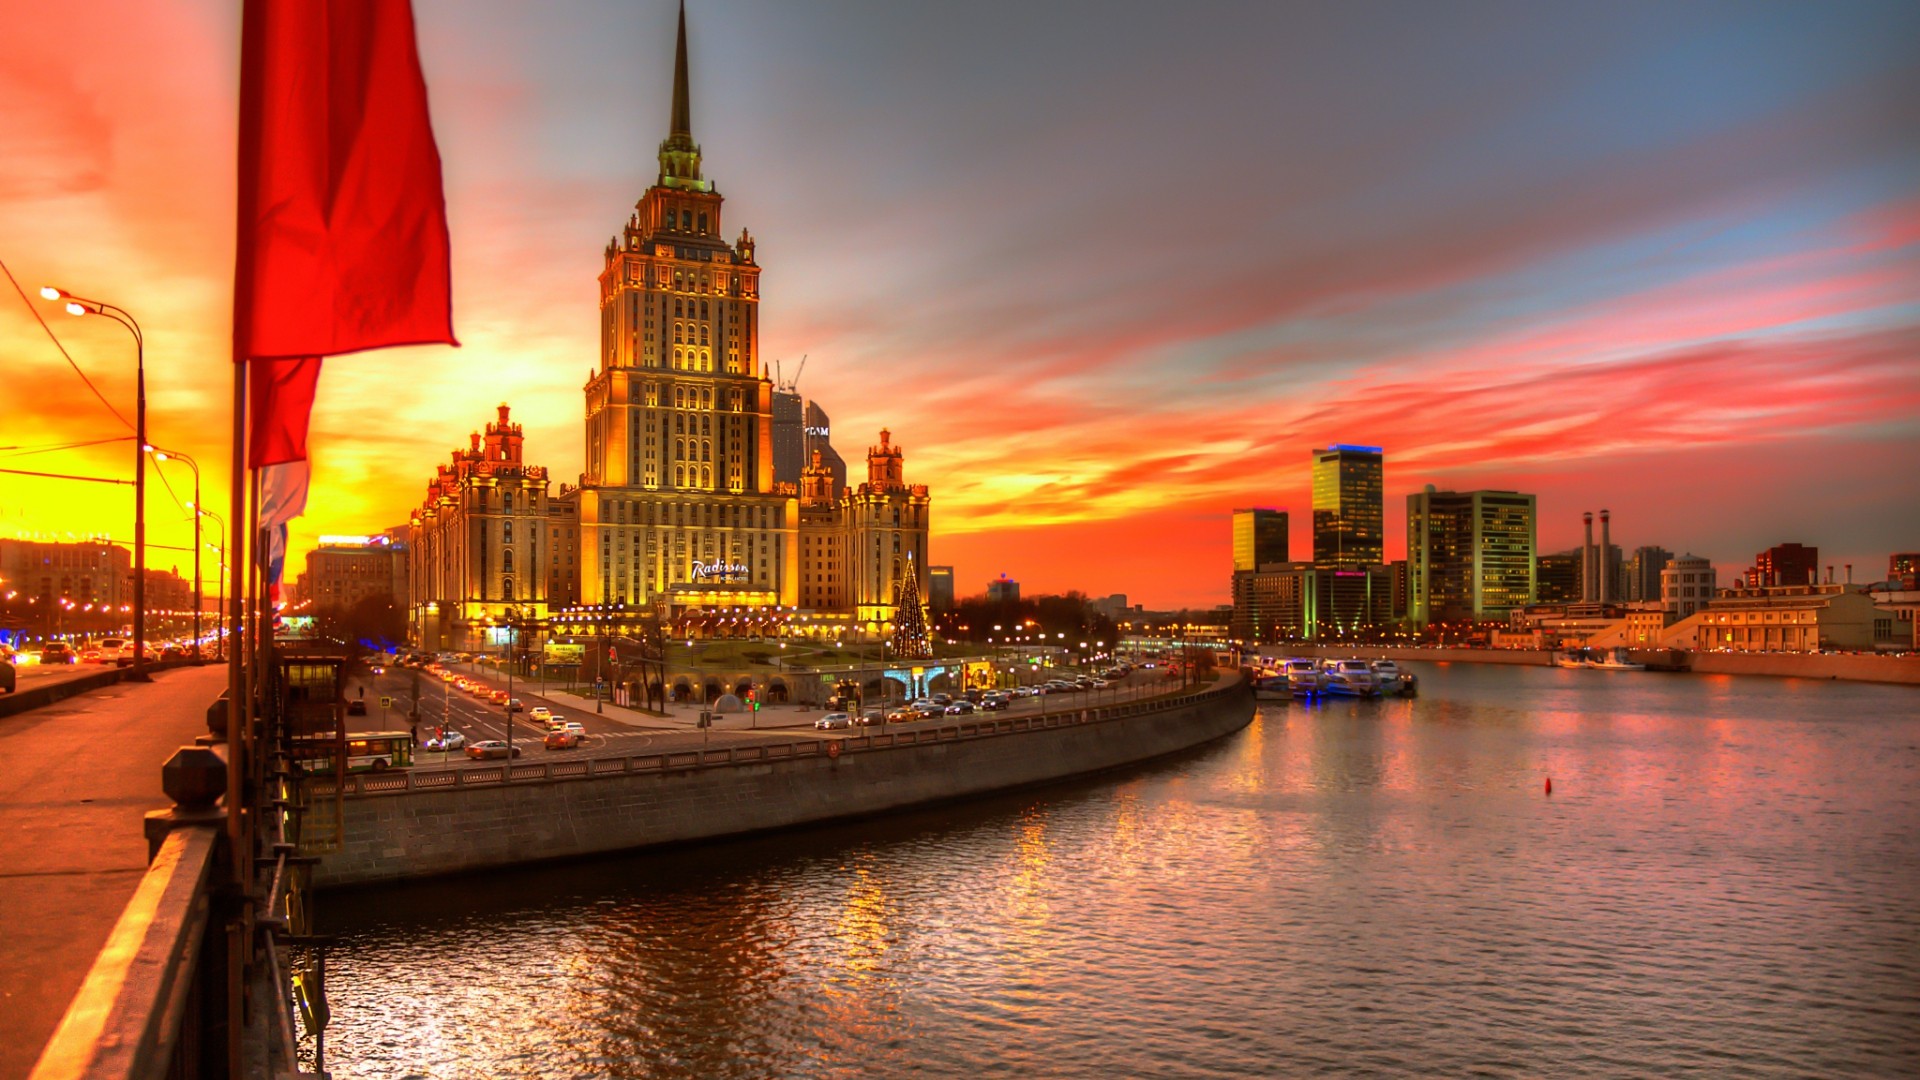 architecture, Building, City, Cityscape, Evening, Lights, Street Light, Moscow, Russia, Hotels, River, Boat, Road, Car, Sunset, Clouds, Christmas Tree, Skyscraper, Flag, Water, HDR Wallpaper